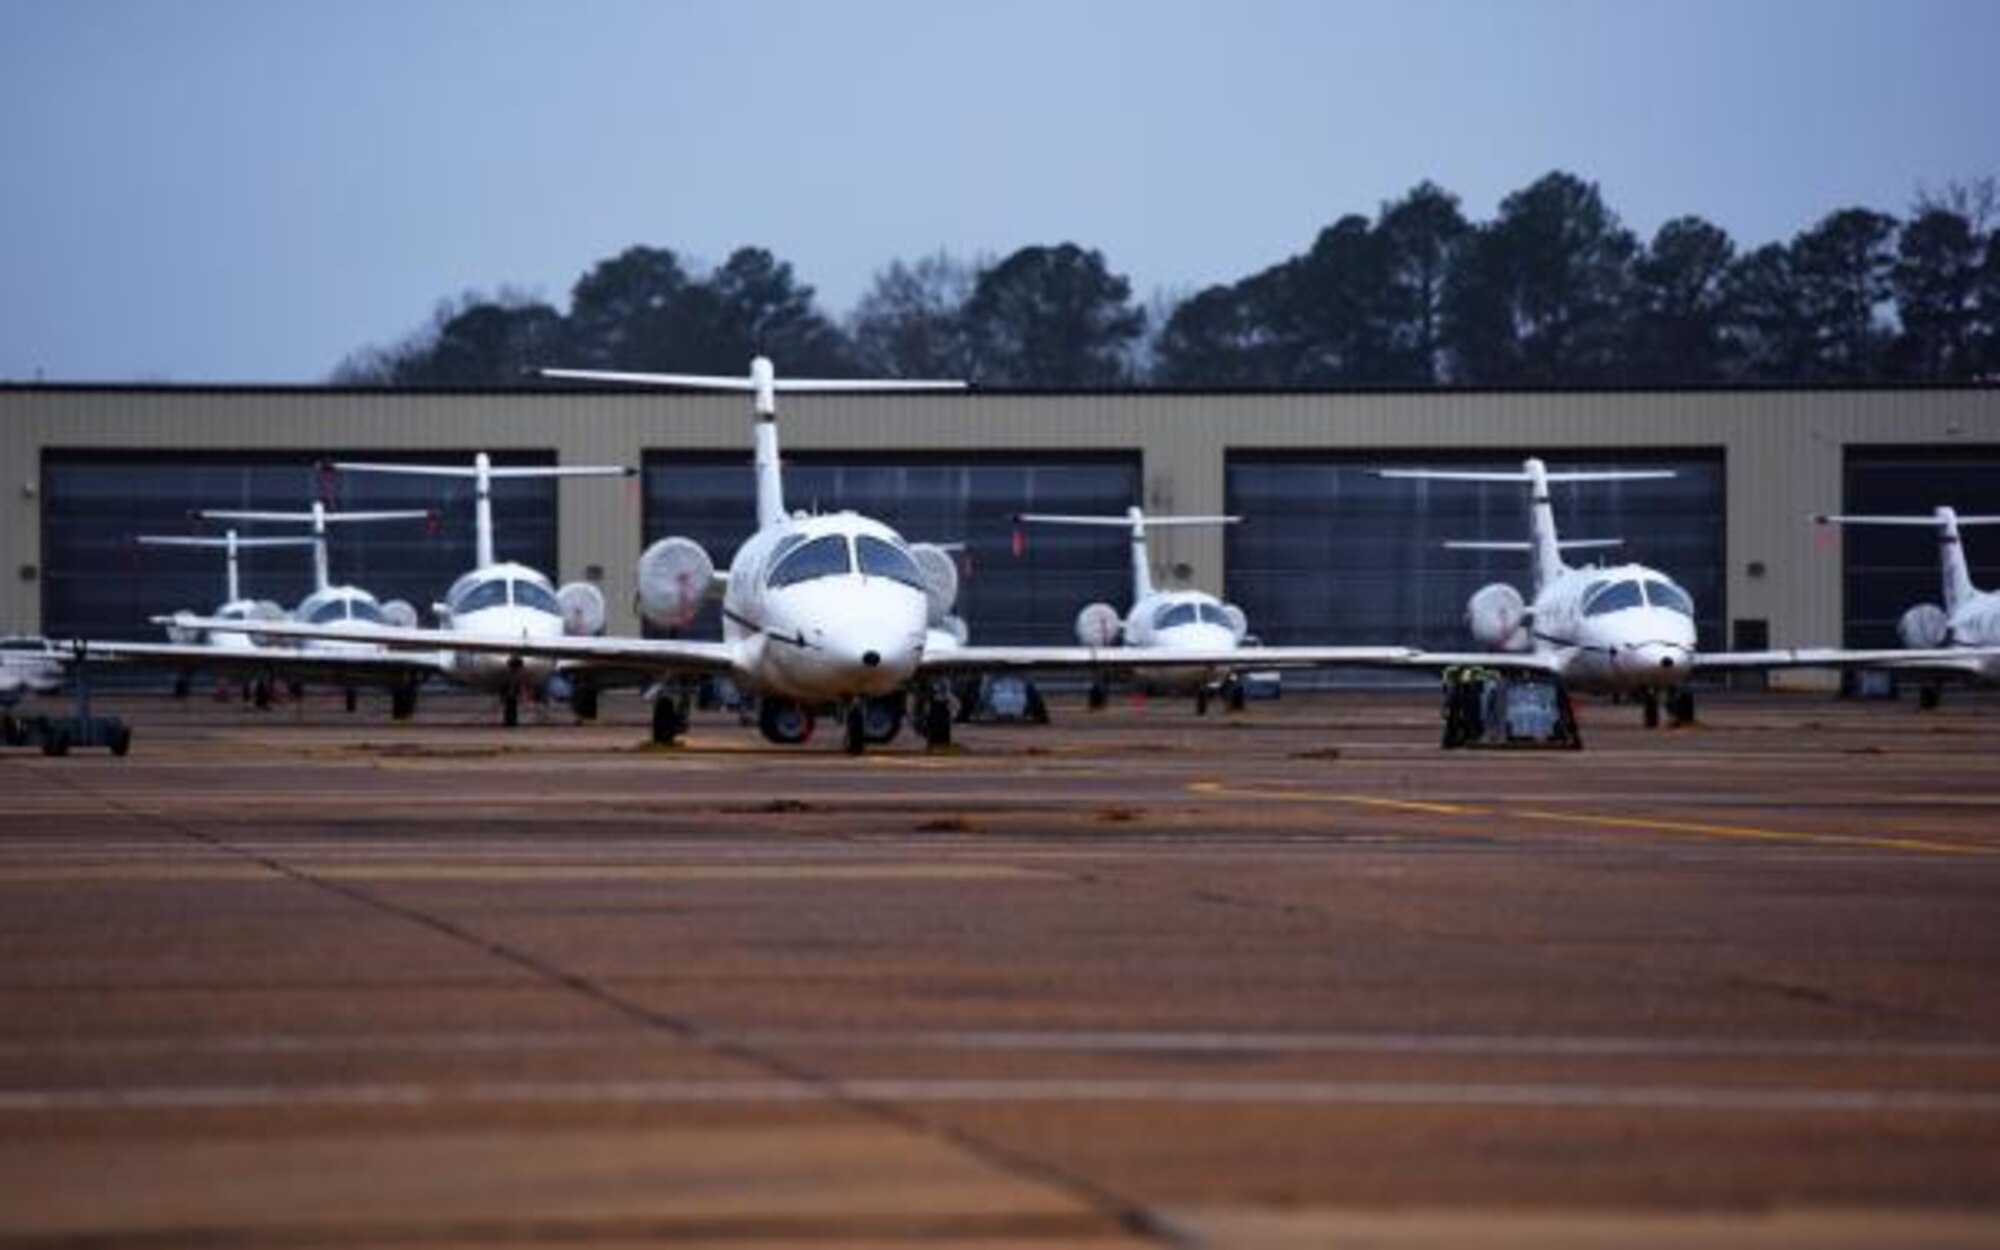 The 48th Flying Training Squadron’s fleet of T-1A Jayhawks sit on the flight line, Feb. 6, 2019, at Columbus Air Force Base, Mississippi. The T-1 is used in Specialized Undergraduate Pilot Training for the students who are selected to fly airlift or tanker aircraft. (U.S. Air Force photo by Senior Airman Beaux Hebert)